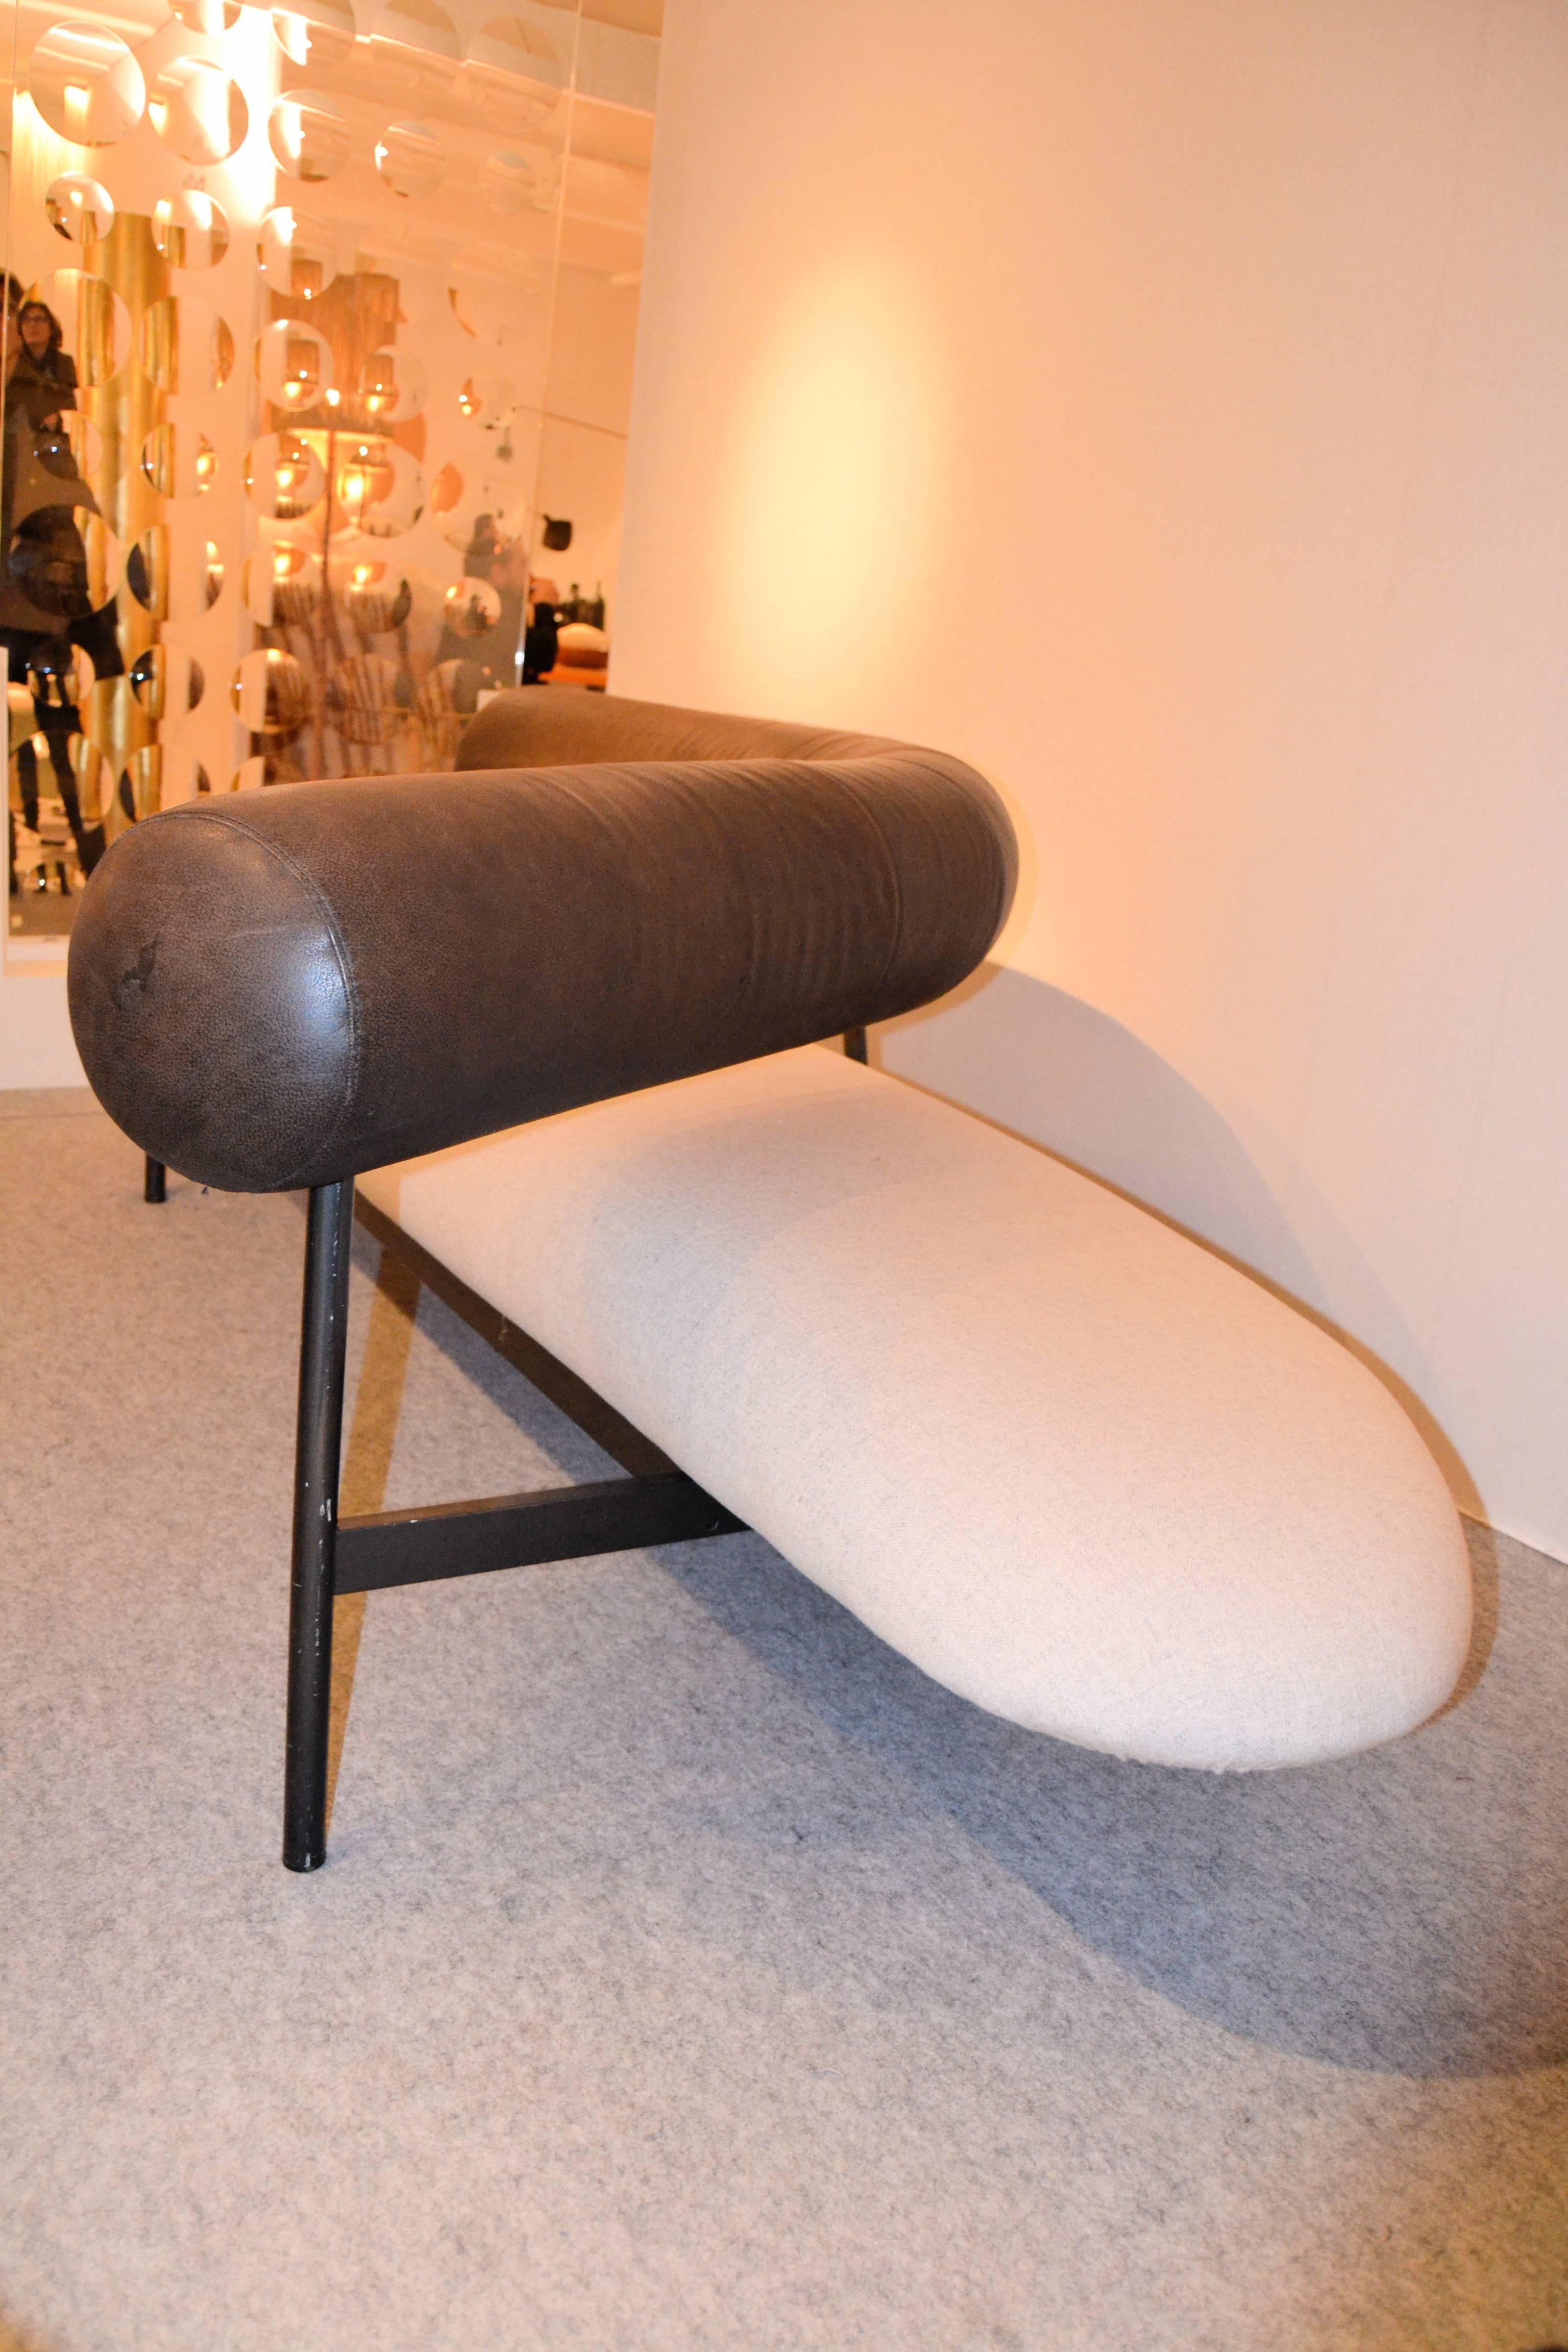 Impresive design for this sofa created  by Javier Mariscal & Pepe Cortes ;called 